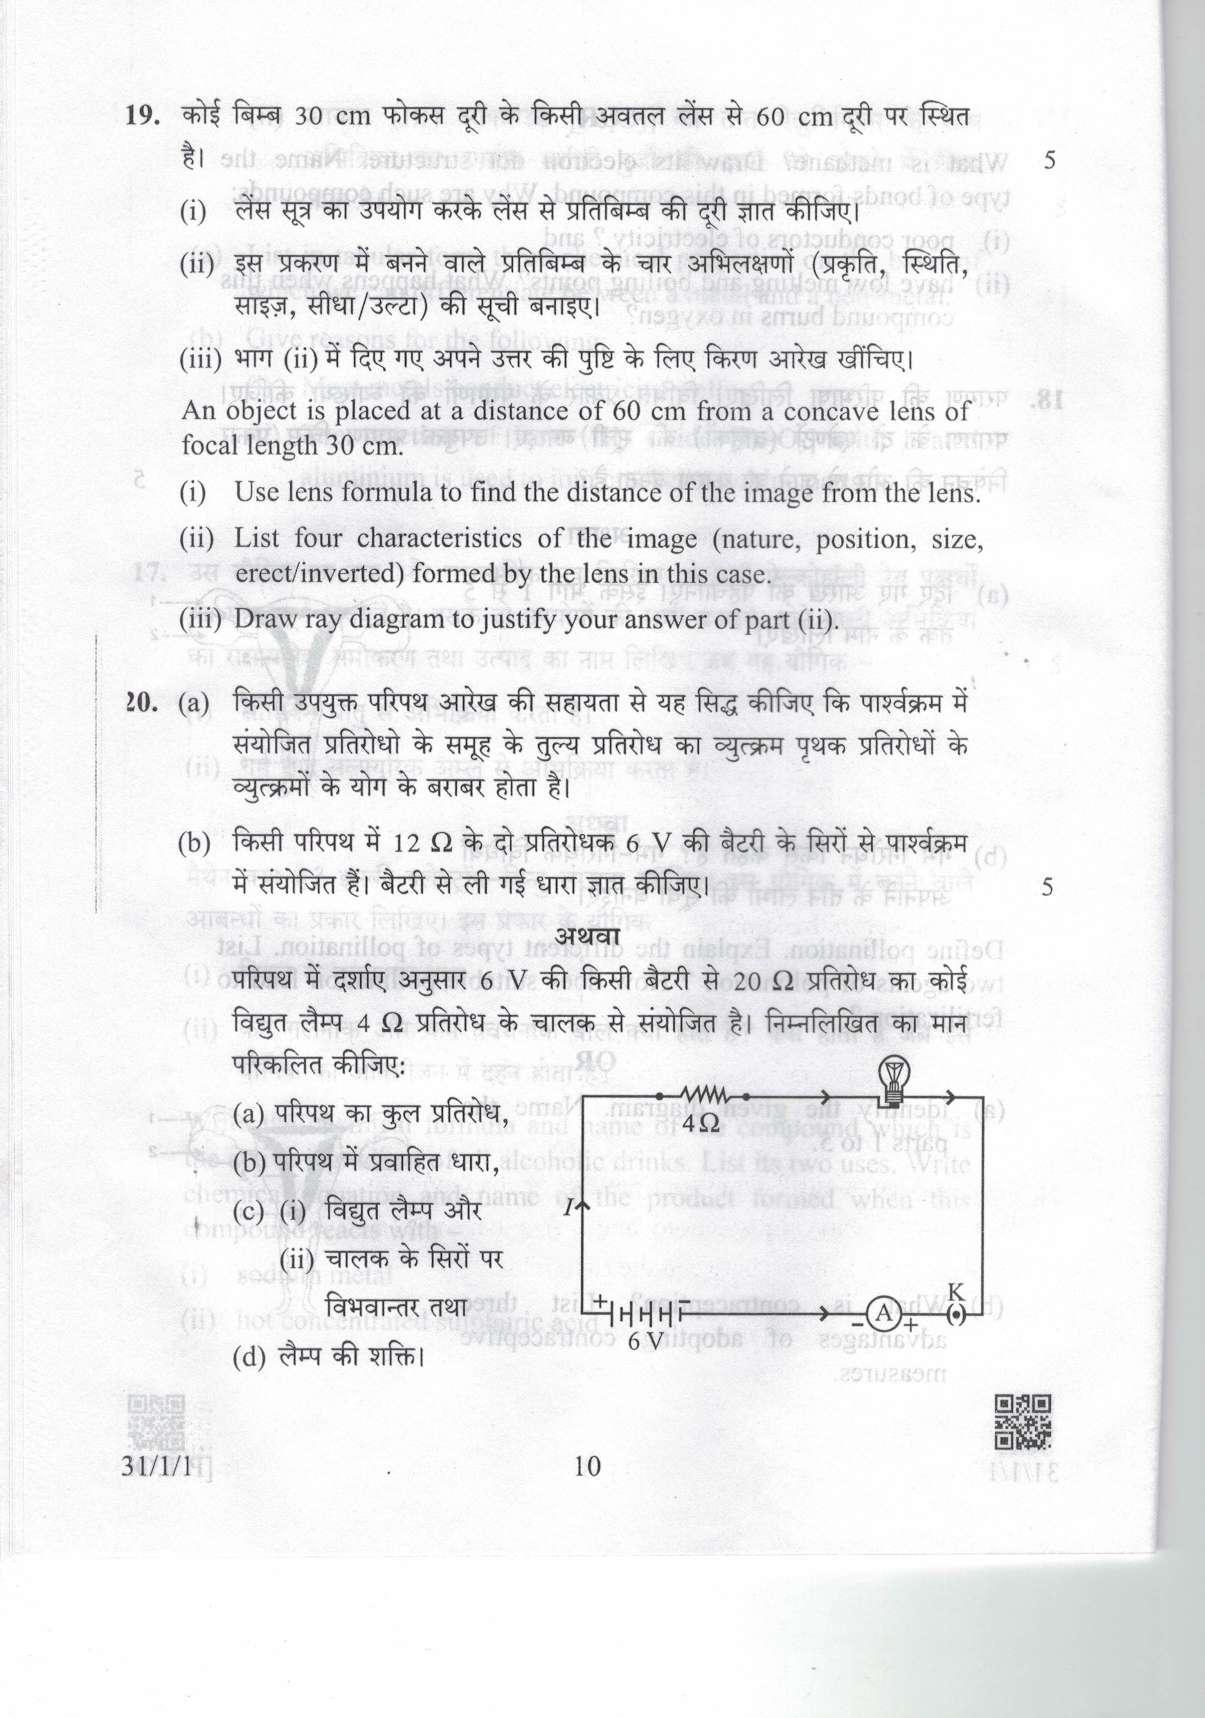 CBSE Class 10 31-1-1 Science 2019 Question Paper - Page 10